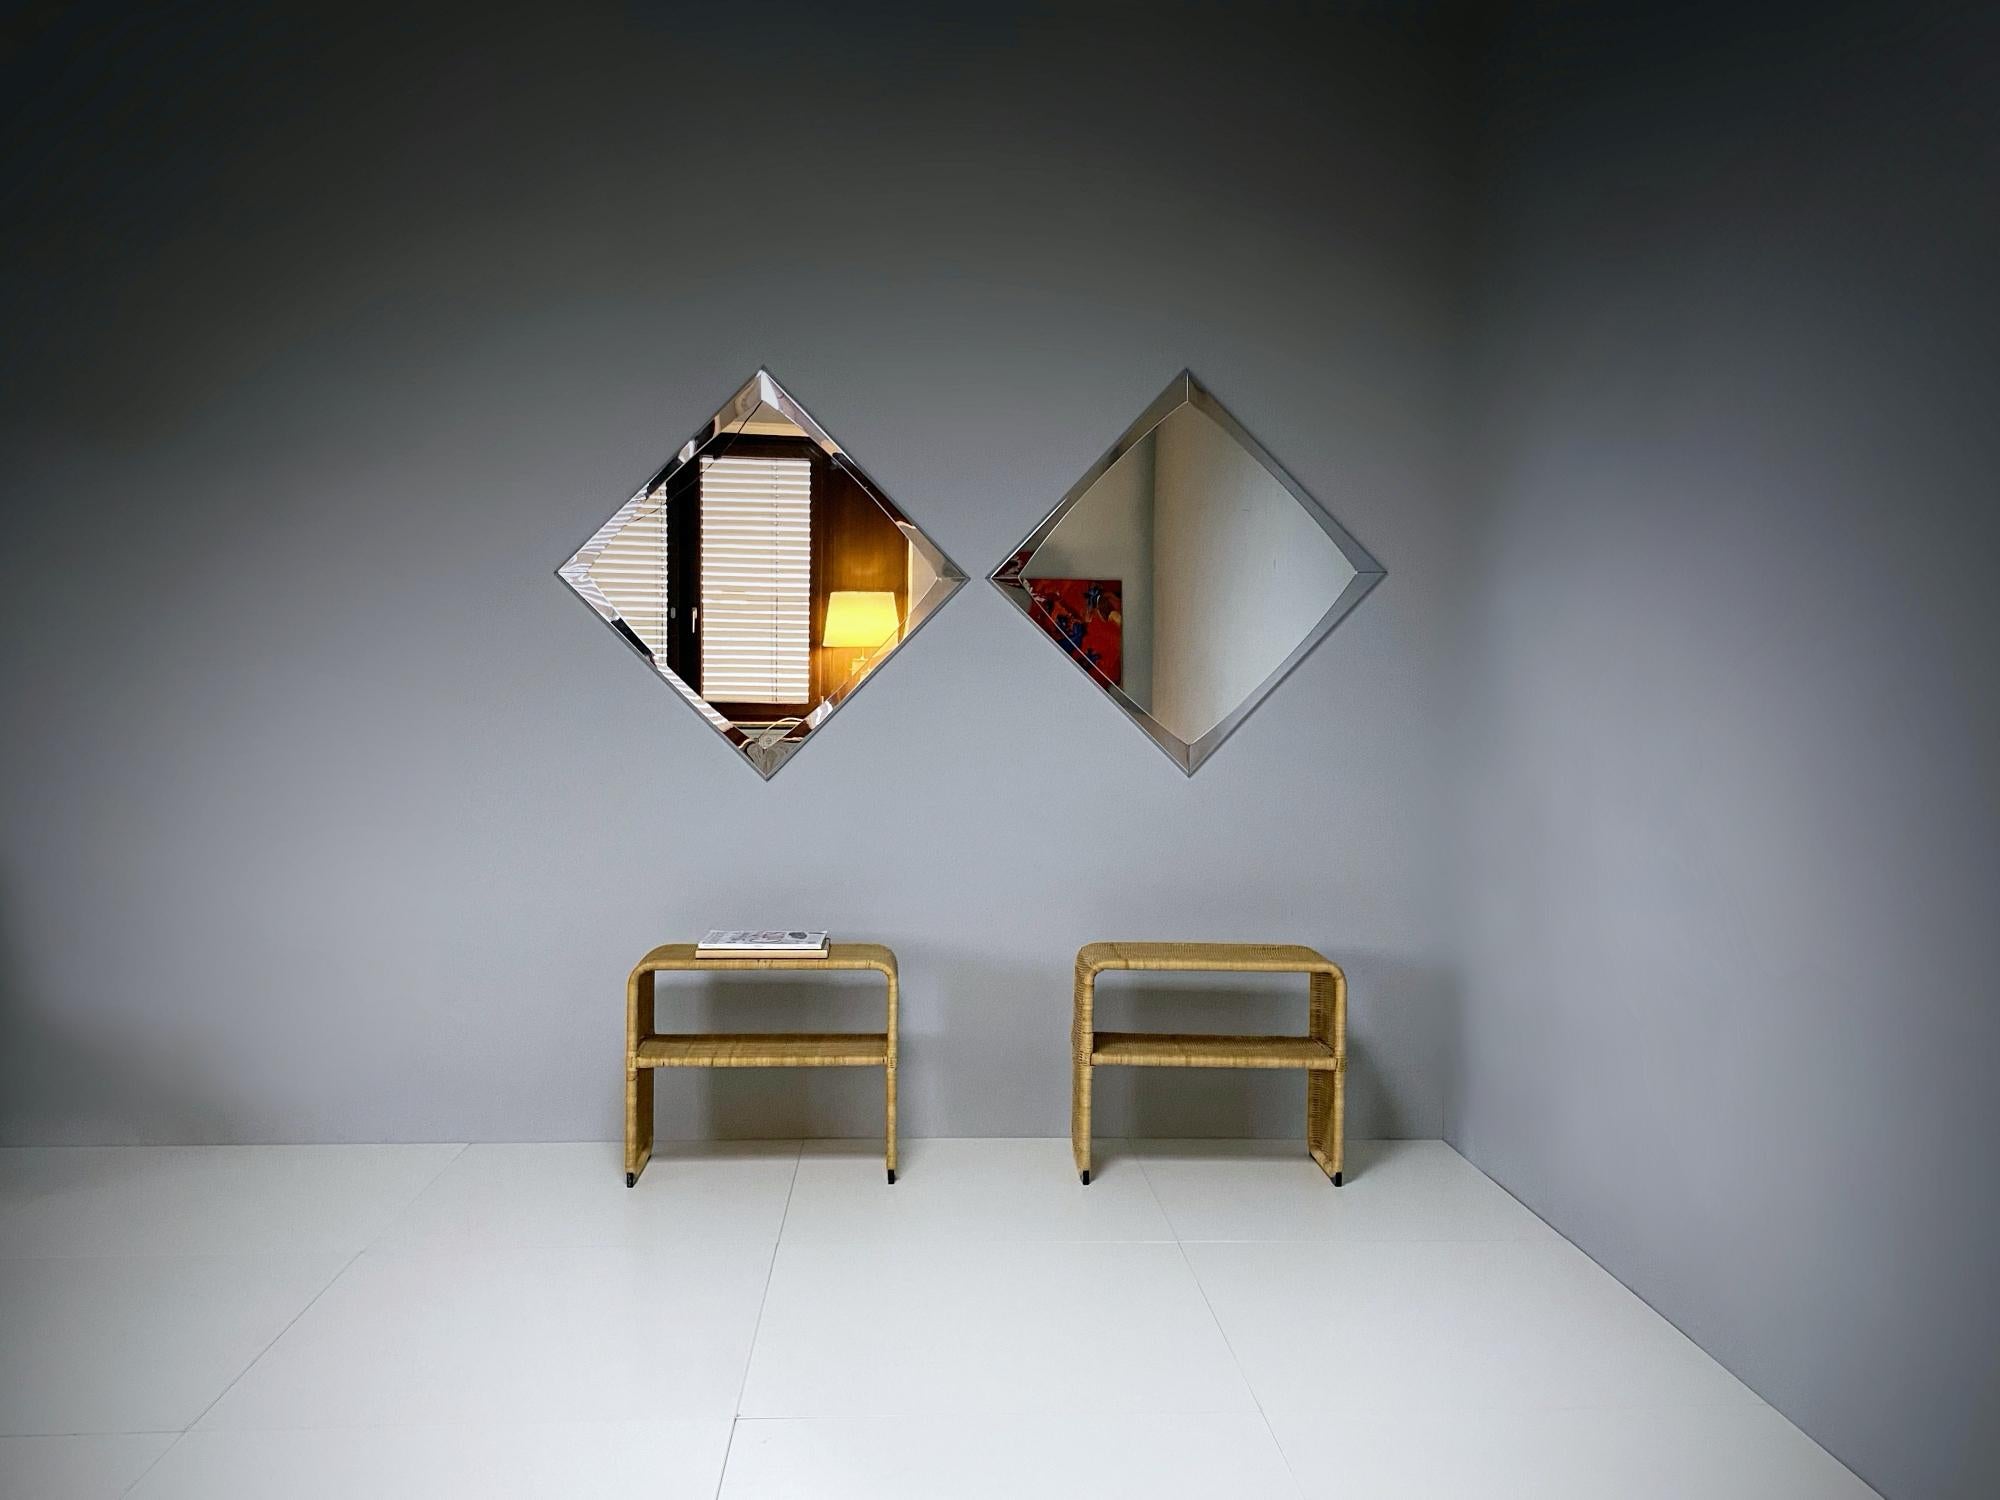 Polished Pair of Italian Designer Midcentury Stainless Steel Wall Mirrors, 1960s, Italy For Sale